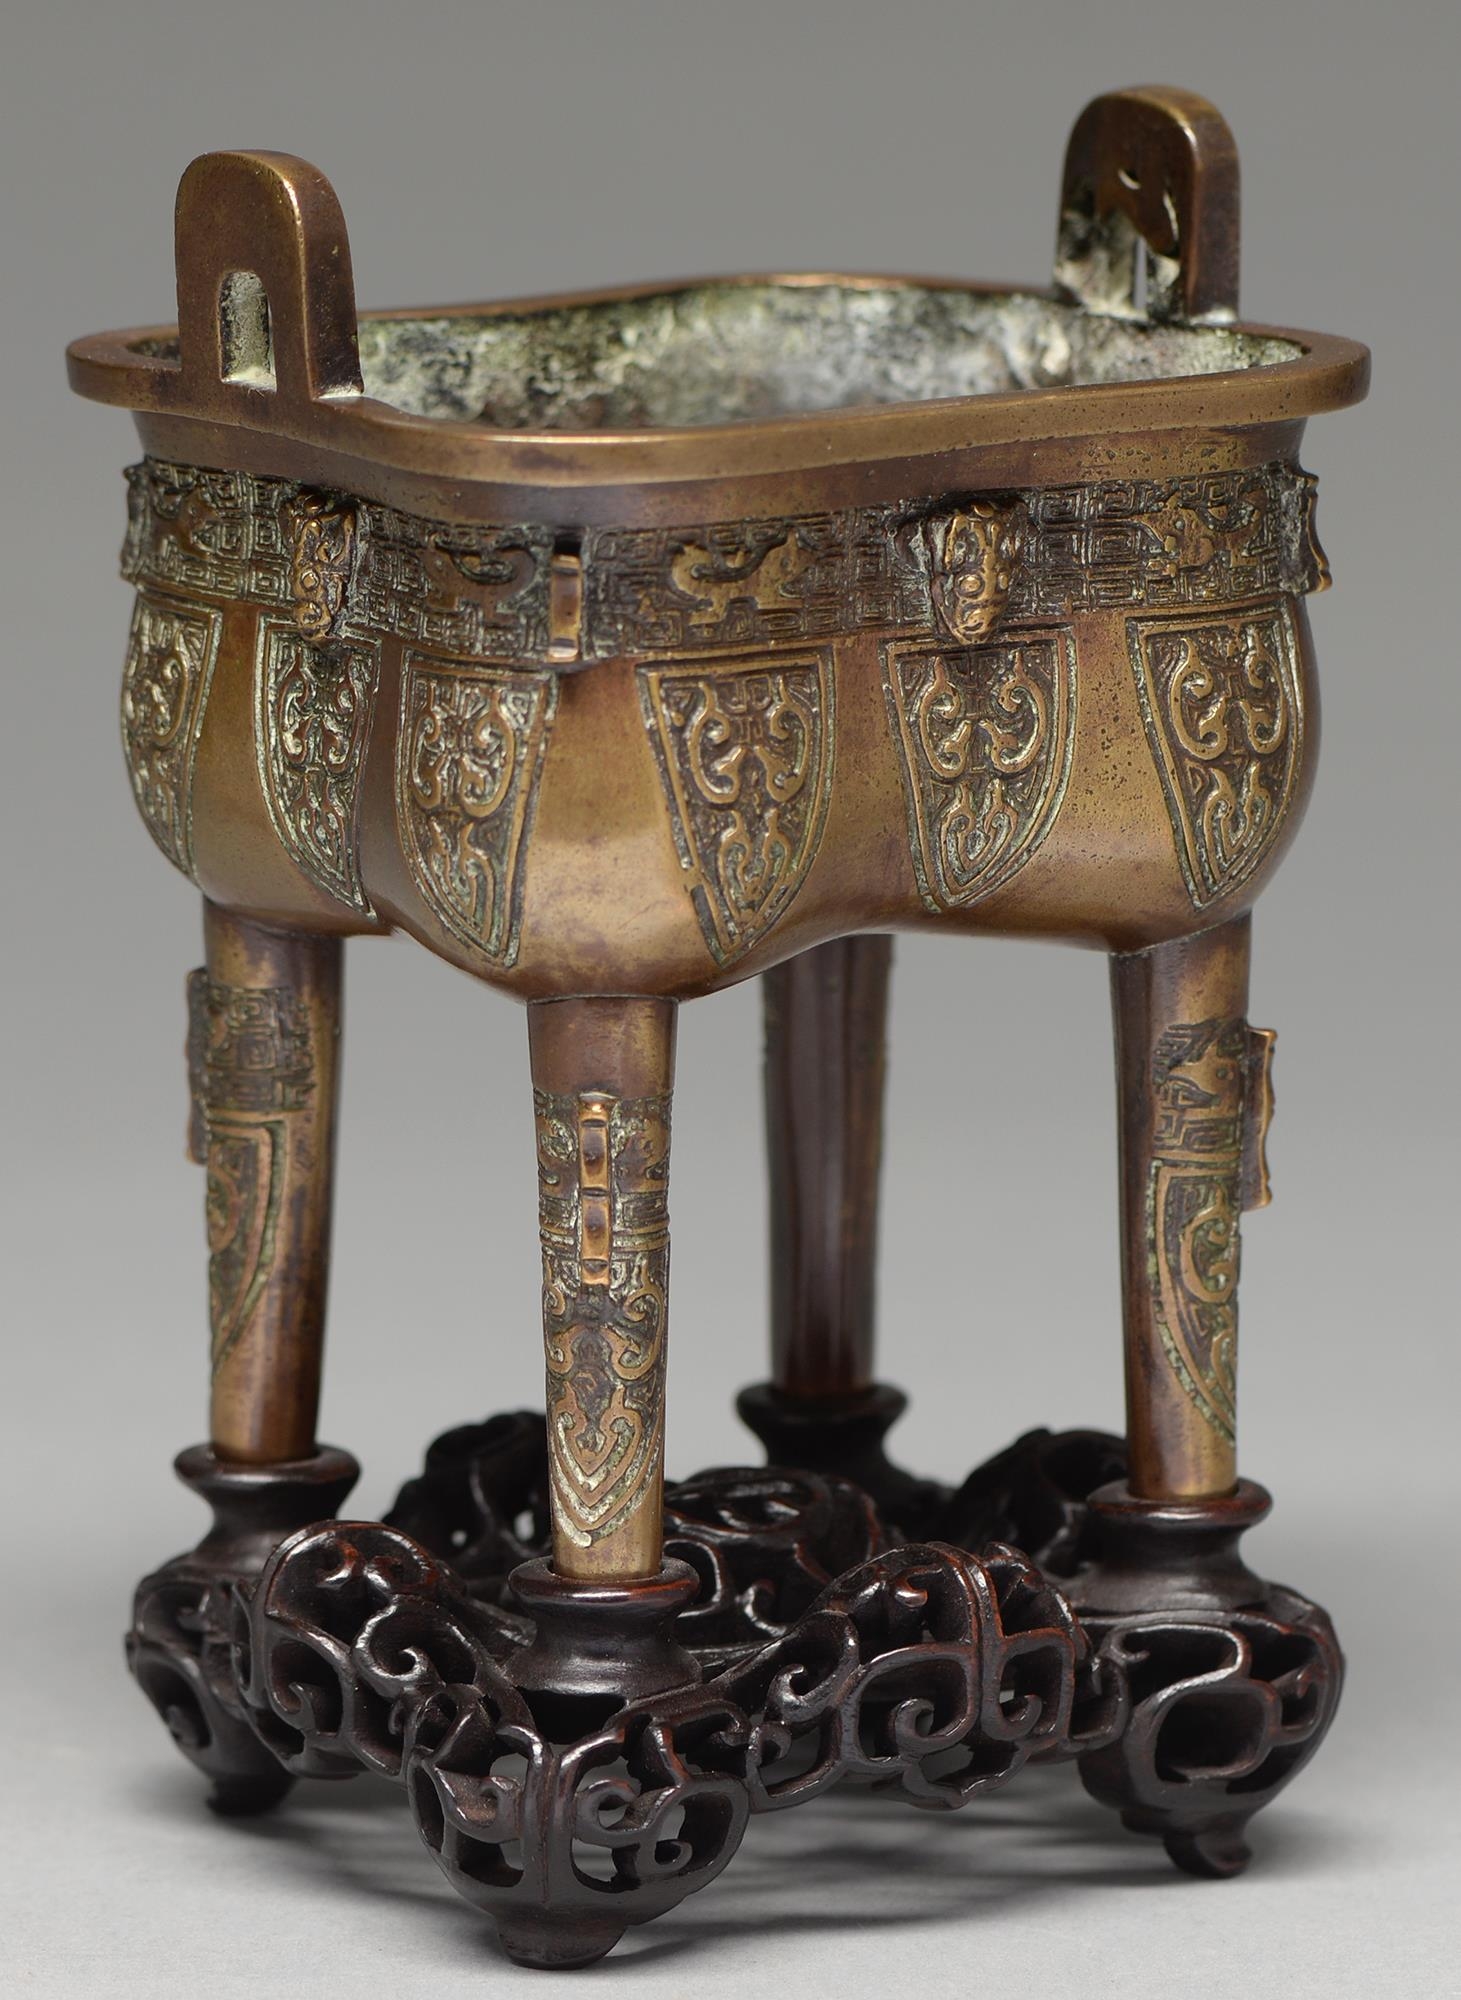 A Chinese bronze archaistic vessel, Ding, 20th c, the sides cast with mask and stylised animals on - Image 3 of 3